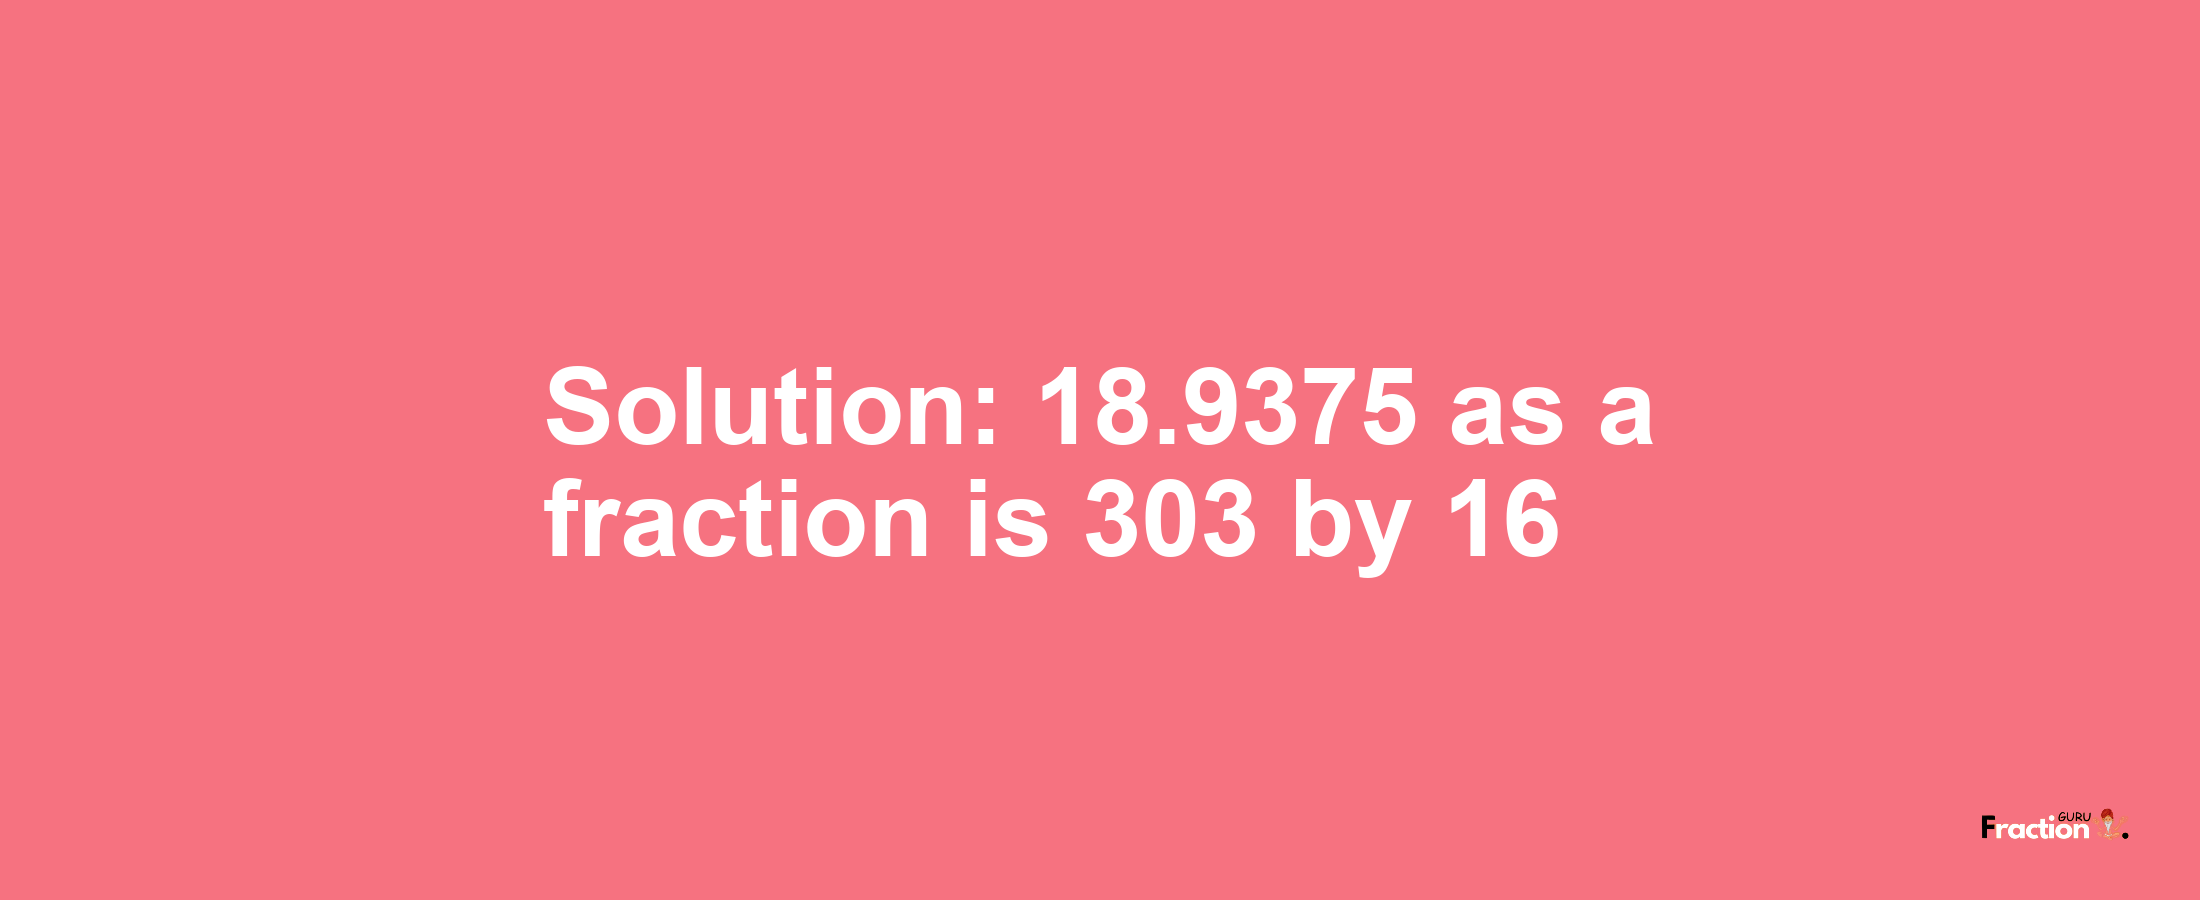 Solution:18.9375 as a fraction is 303/16